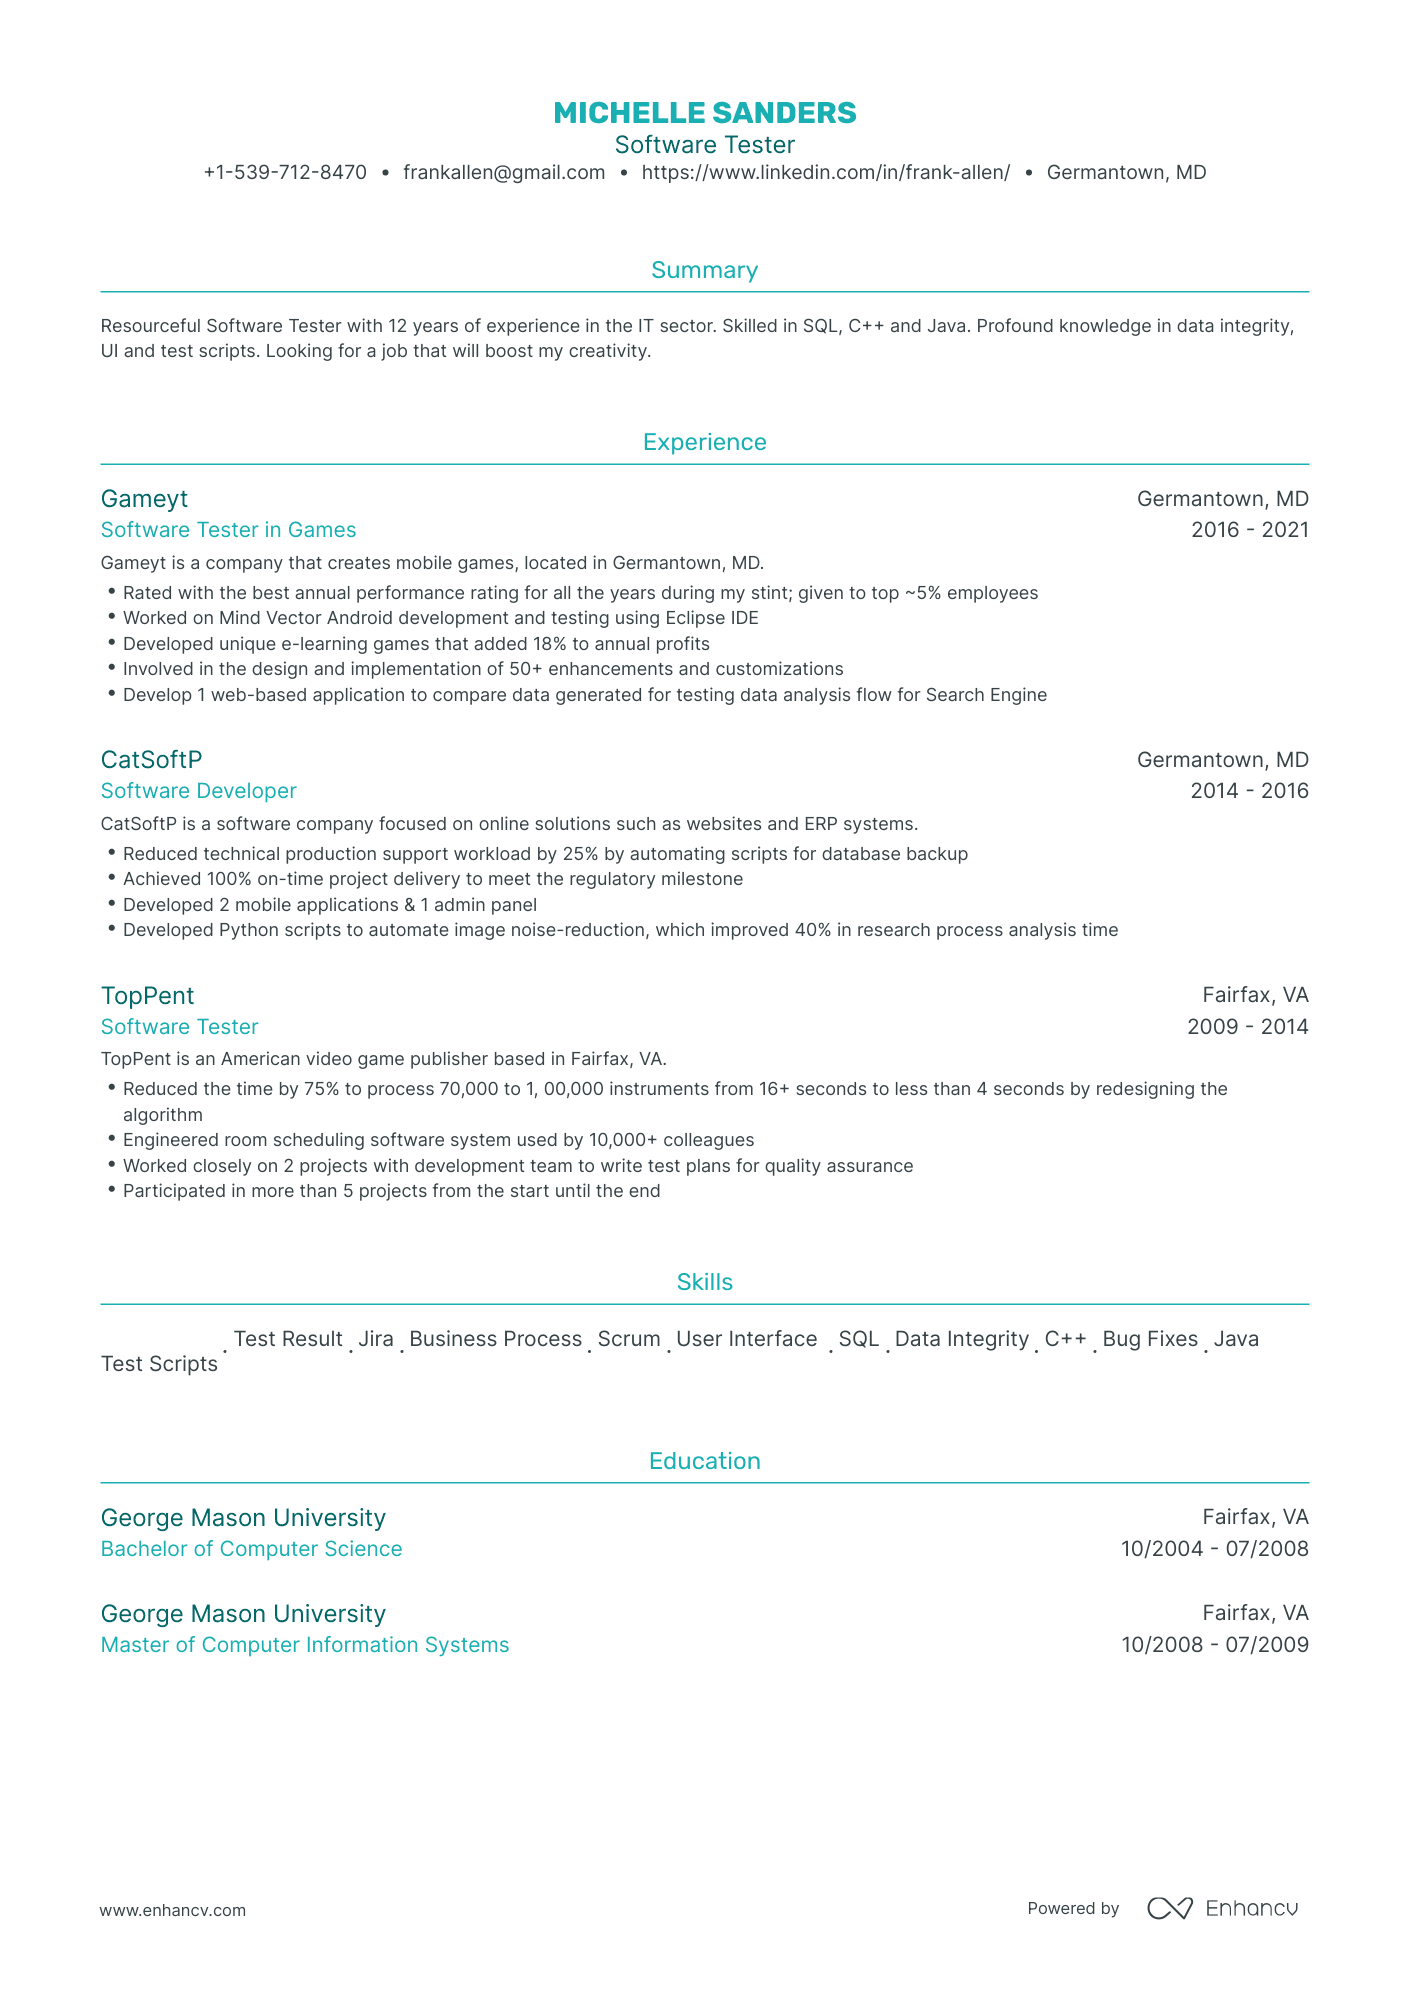 Traditional Software Tester Resume Template